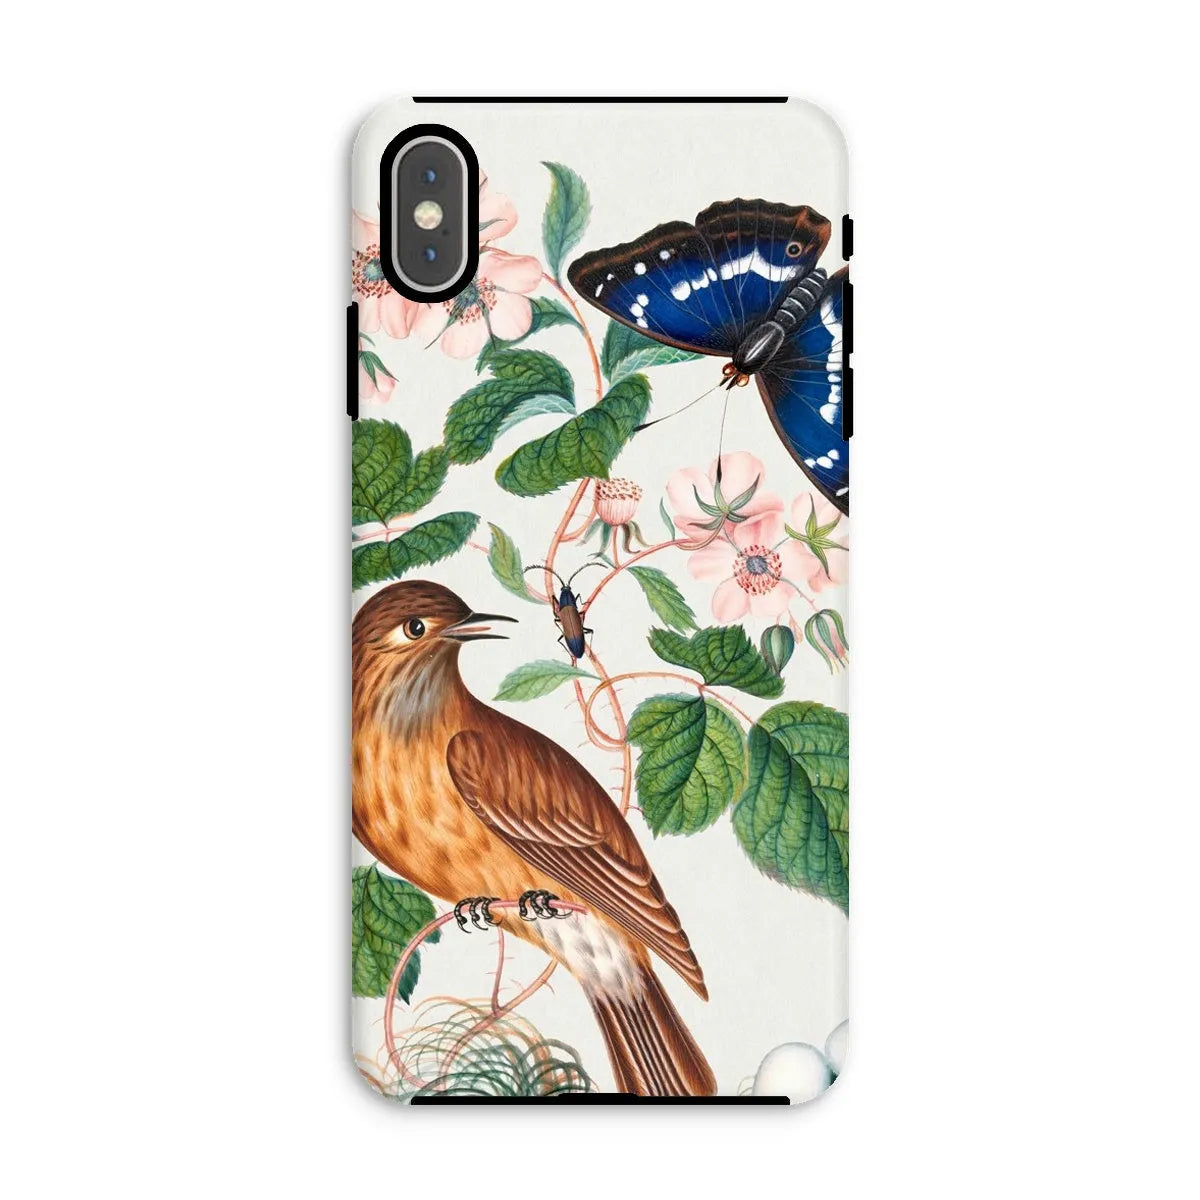 Flycatcher Emperor And Beetle - Art Phone Case - James Bolton - Iphone Xs Max / Matte - Mobile Phone Cases - Aesthetic